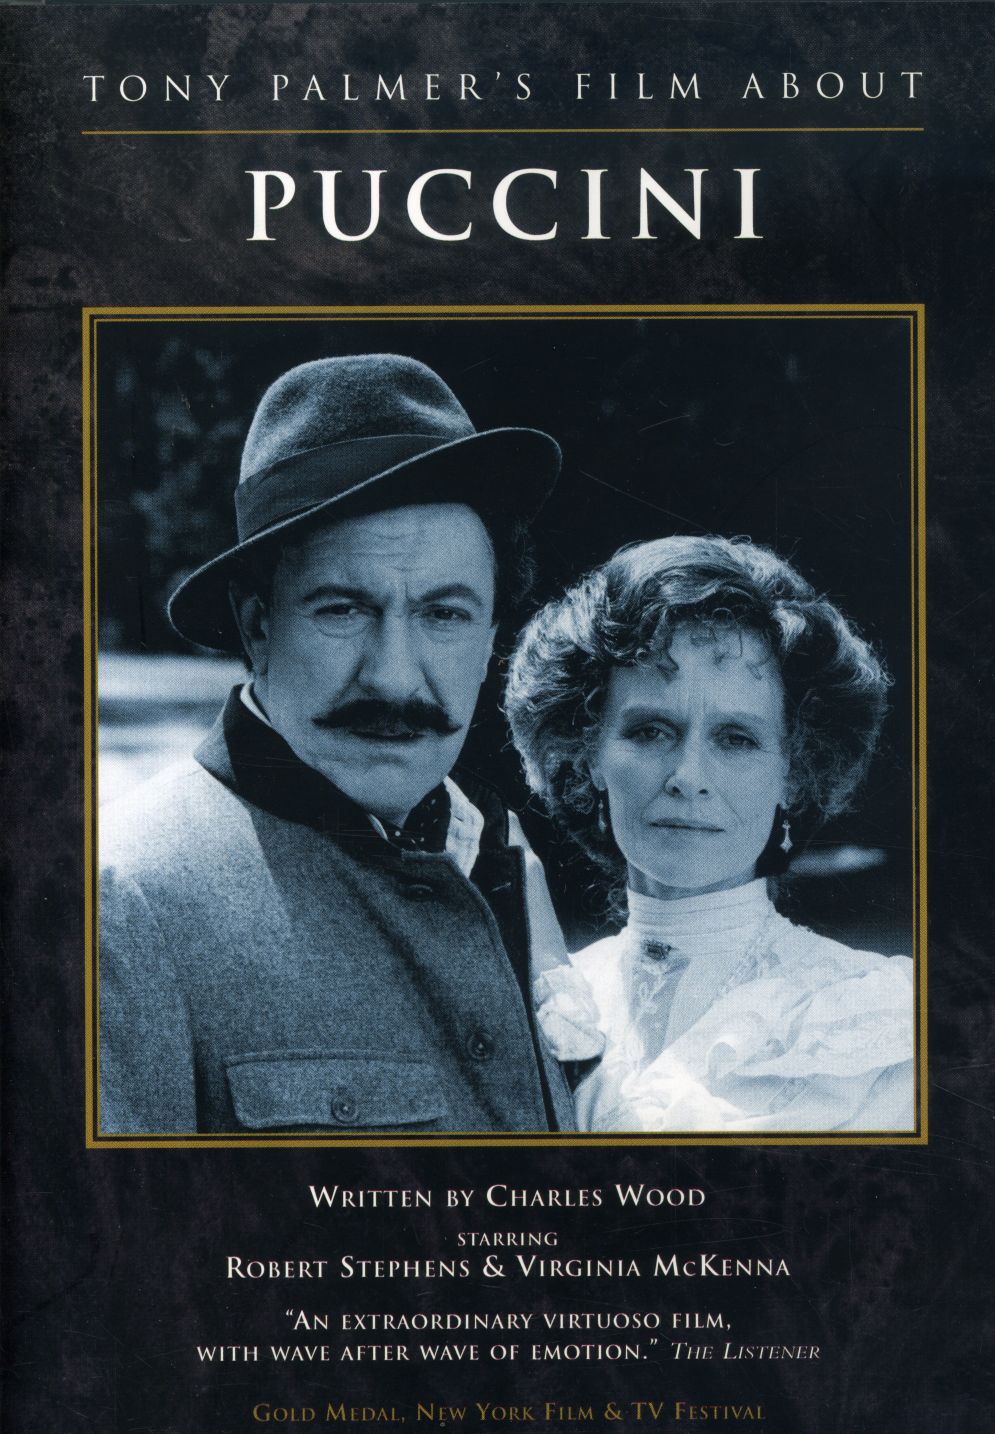 TONY PALMER'S FILM ABOUT PUCCINI / (WS)